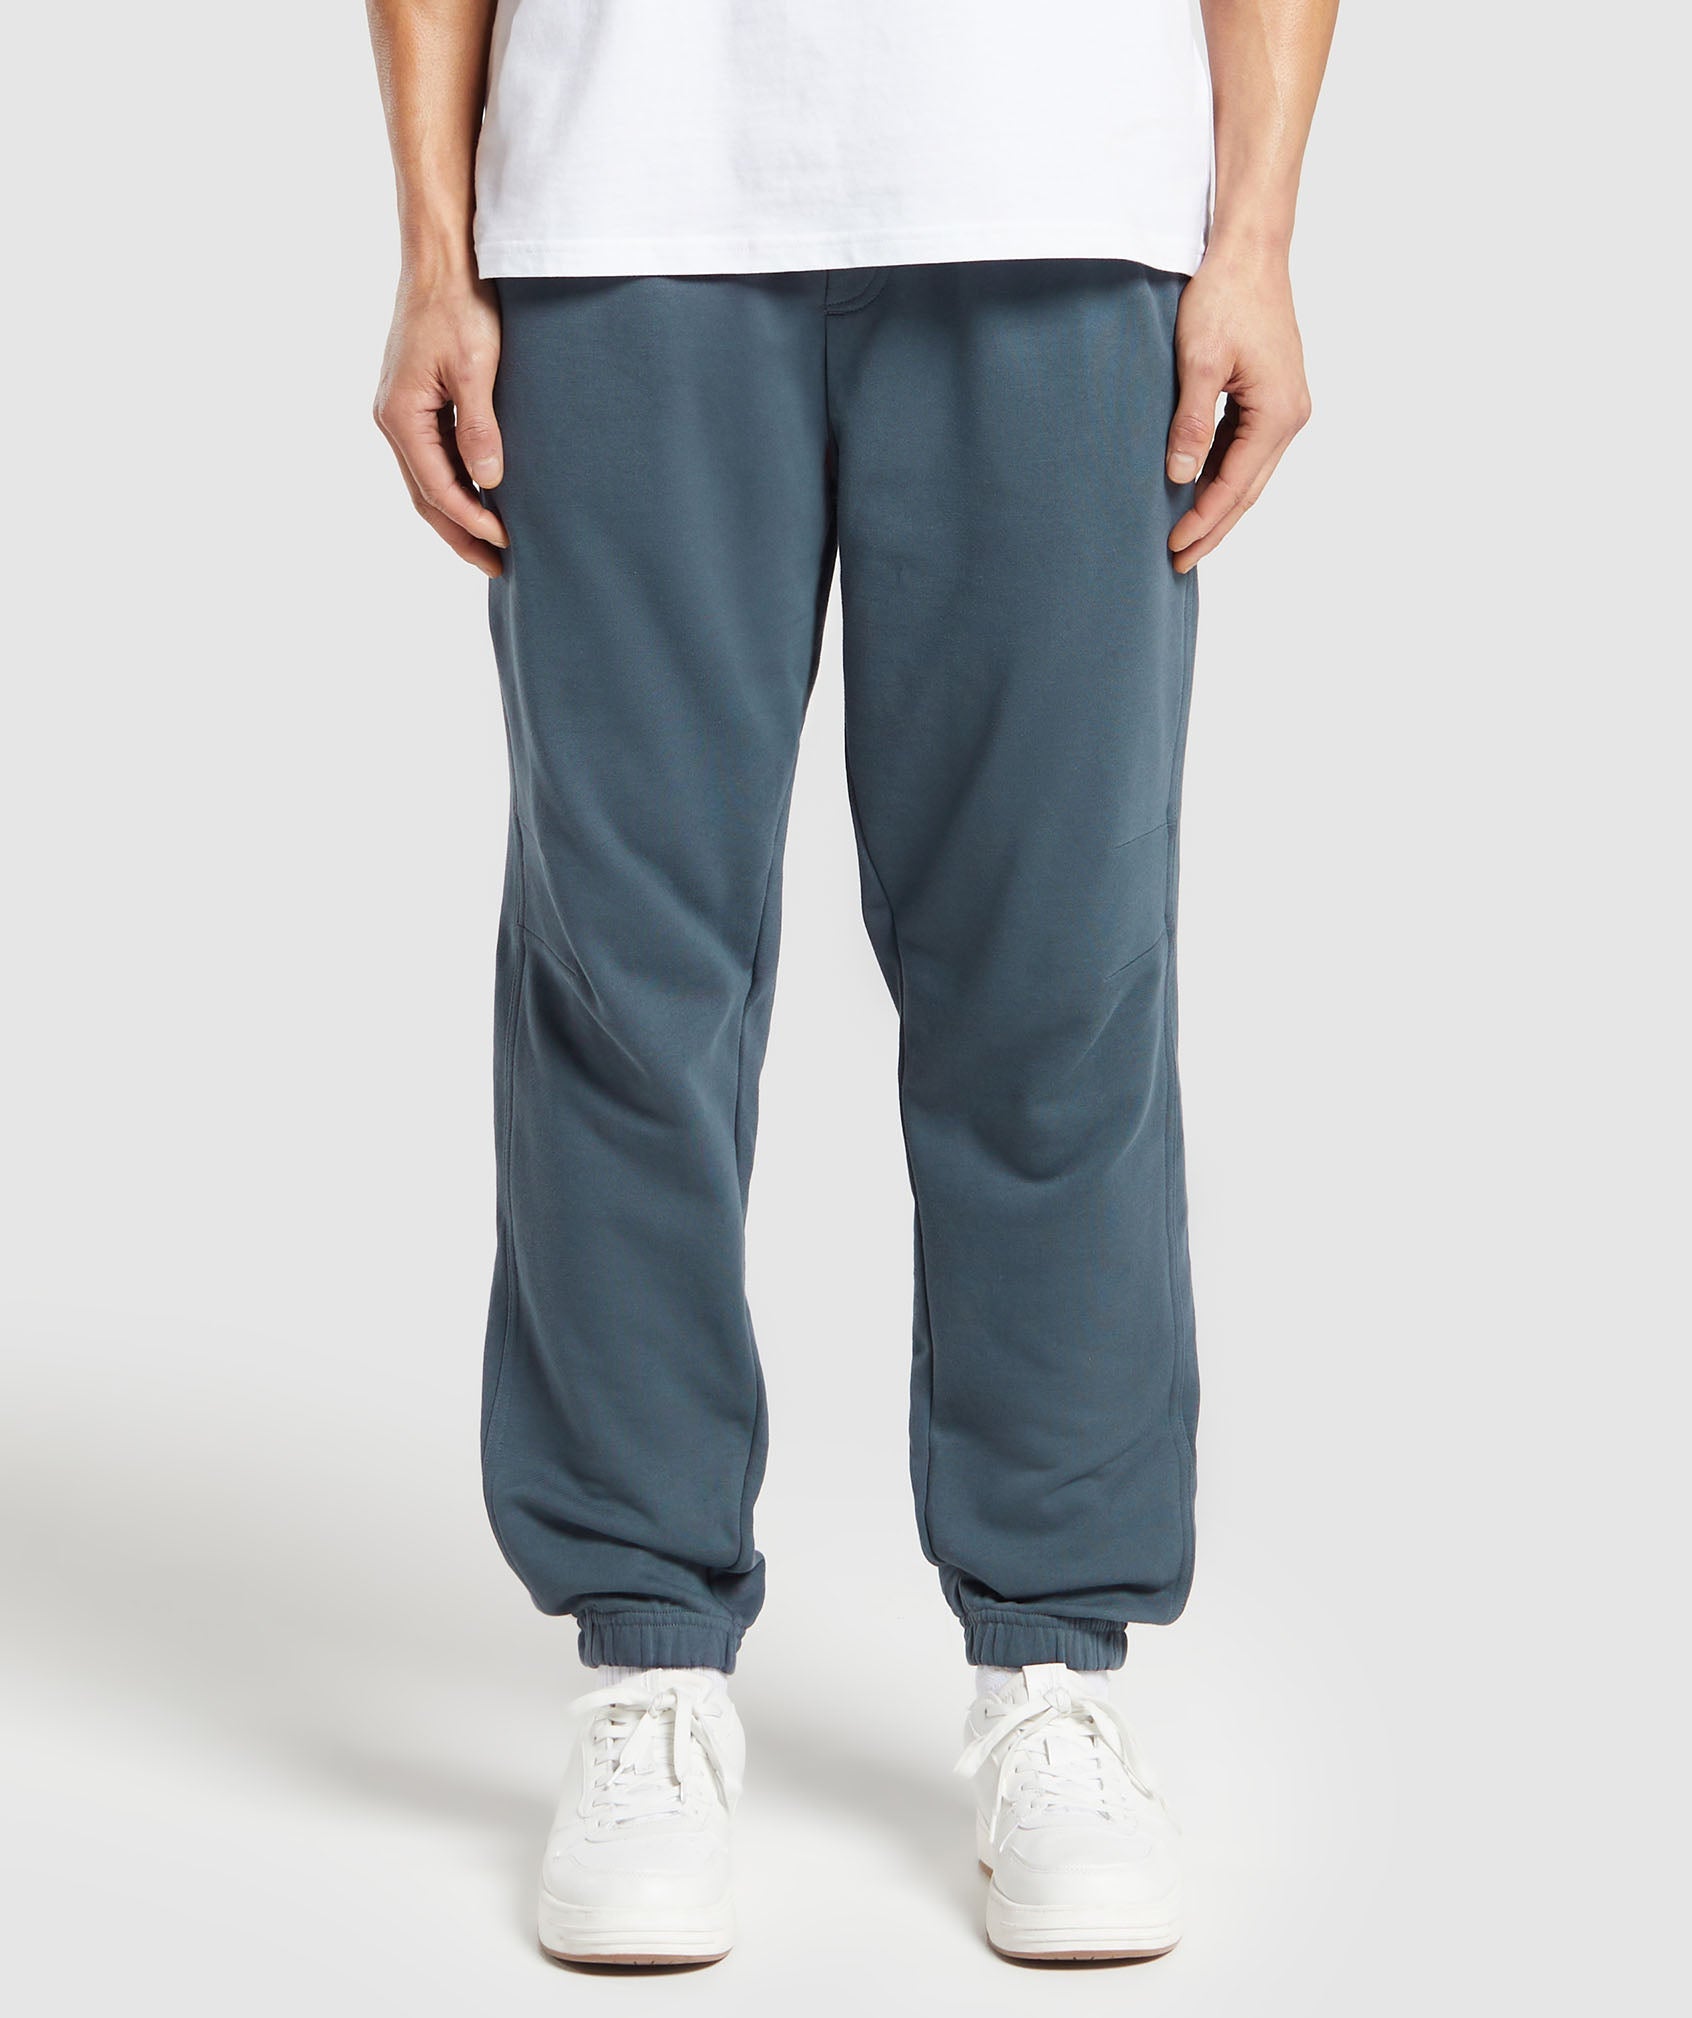 Rest Day Essentials Joggers in {{variantColor} is out of stock